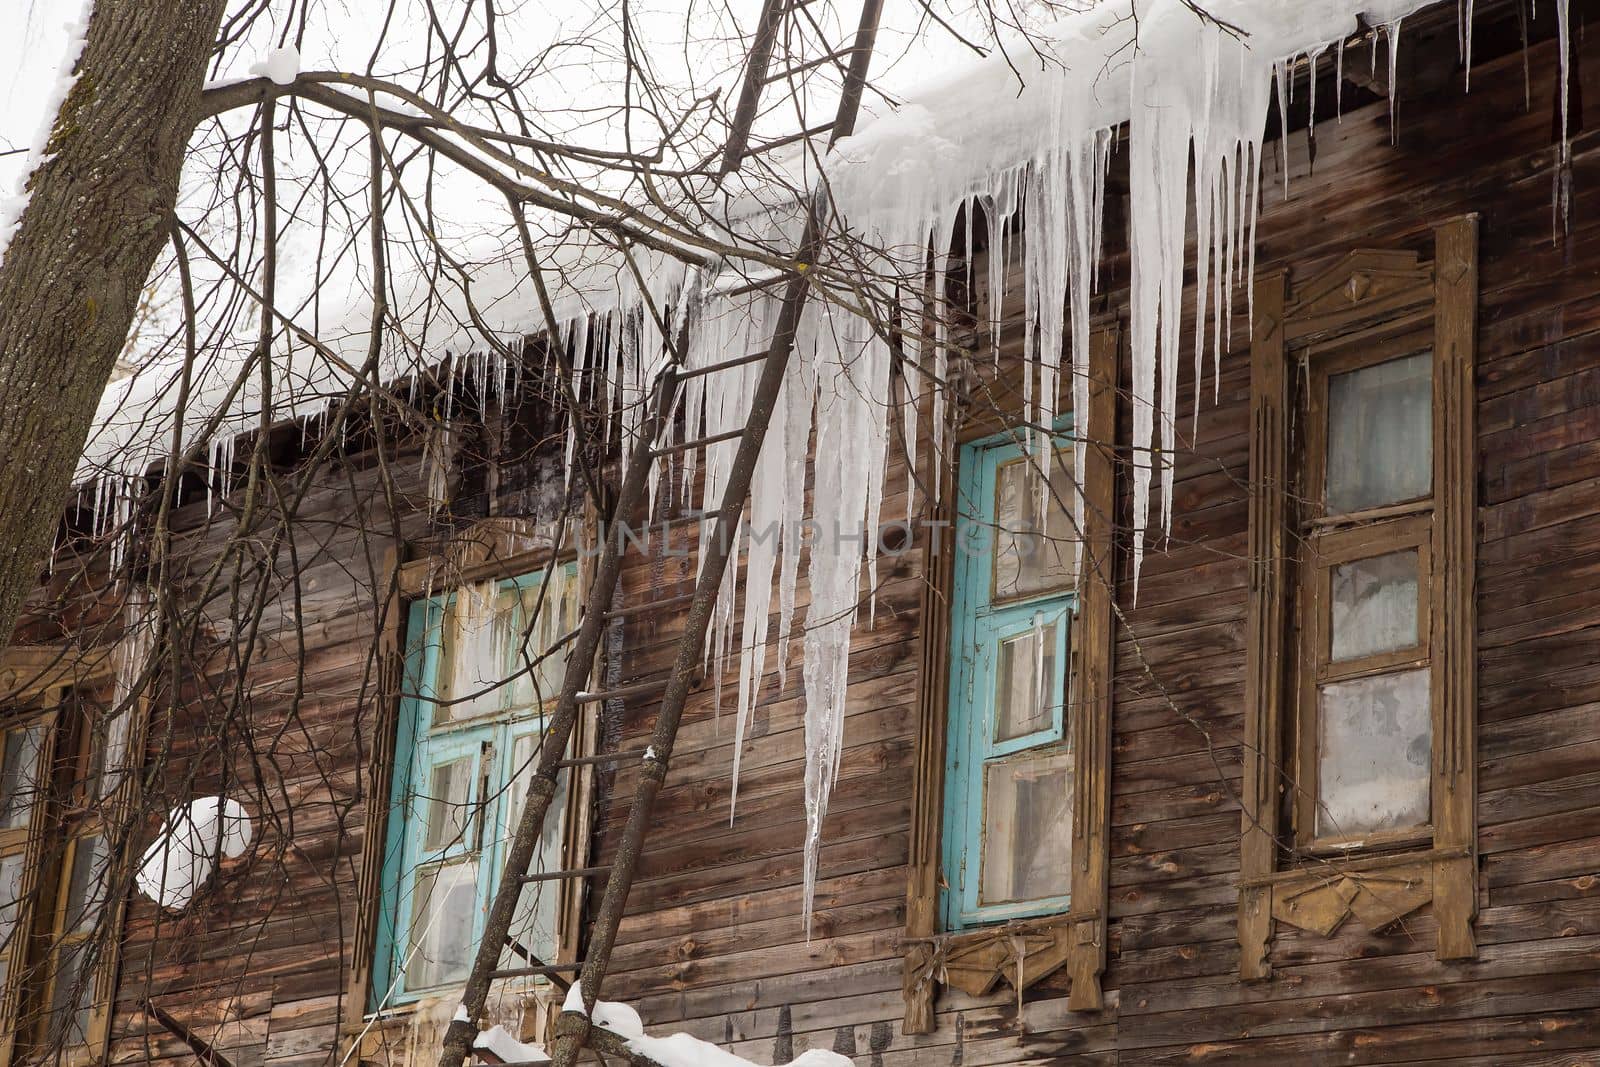 Sharp, frozen icicles hang on the edge of the roof, winter or spring. Log wall of an old wooden house with windows. Large cascades of icicles in smooth, beautiful rows. Cloudy winter day, soft light.